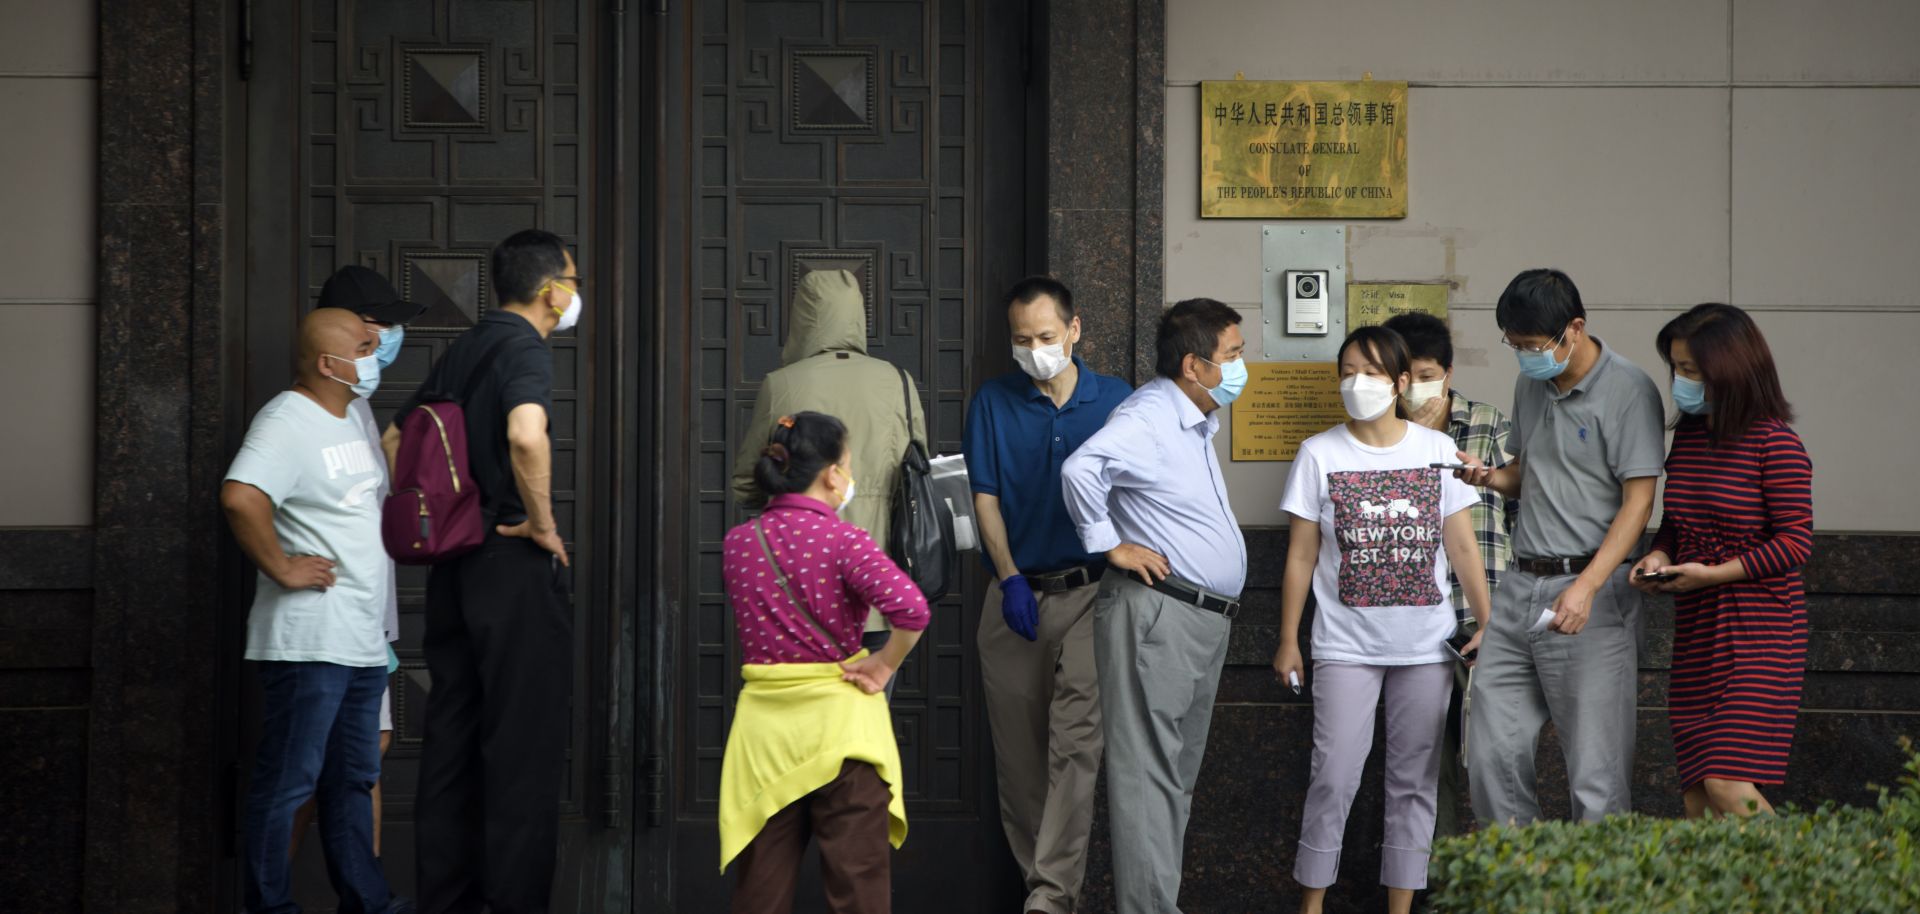 A group of people stand outside the Chinese consulate in Houston, Texas, after the United States ordered Beijing to immediately close the office on July 22, 2020.